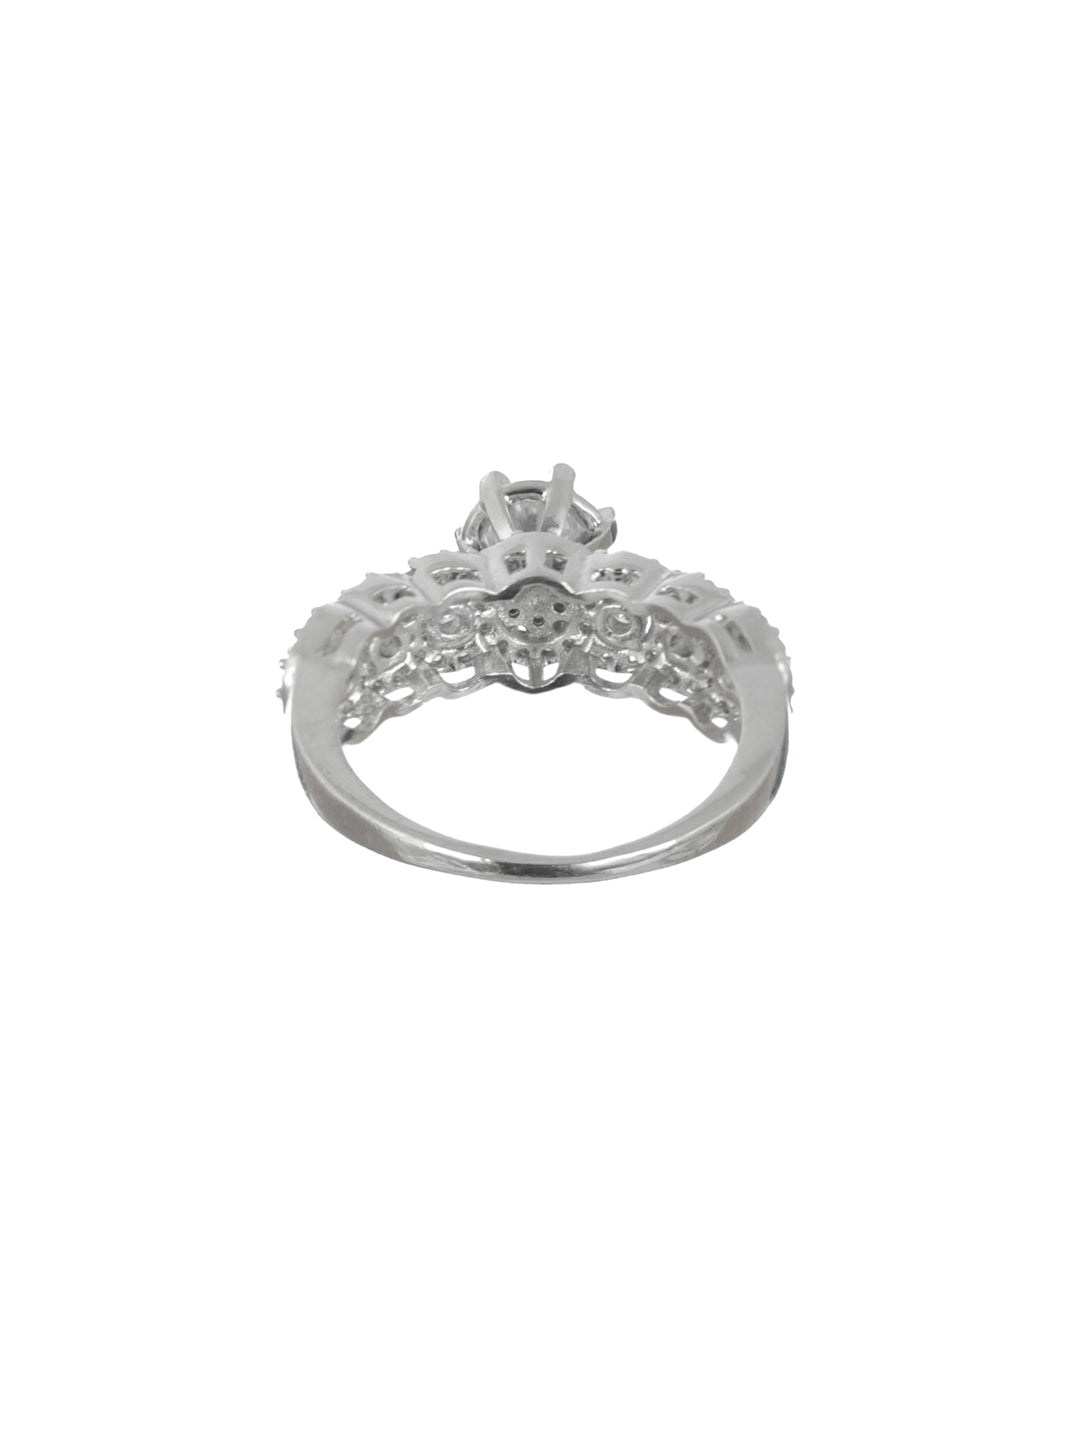 Priyaasi Solitaire American Diamond Silver-Plated Ring